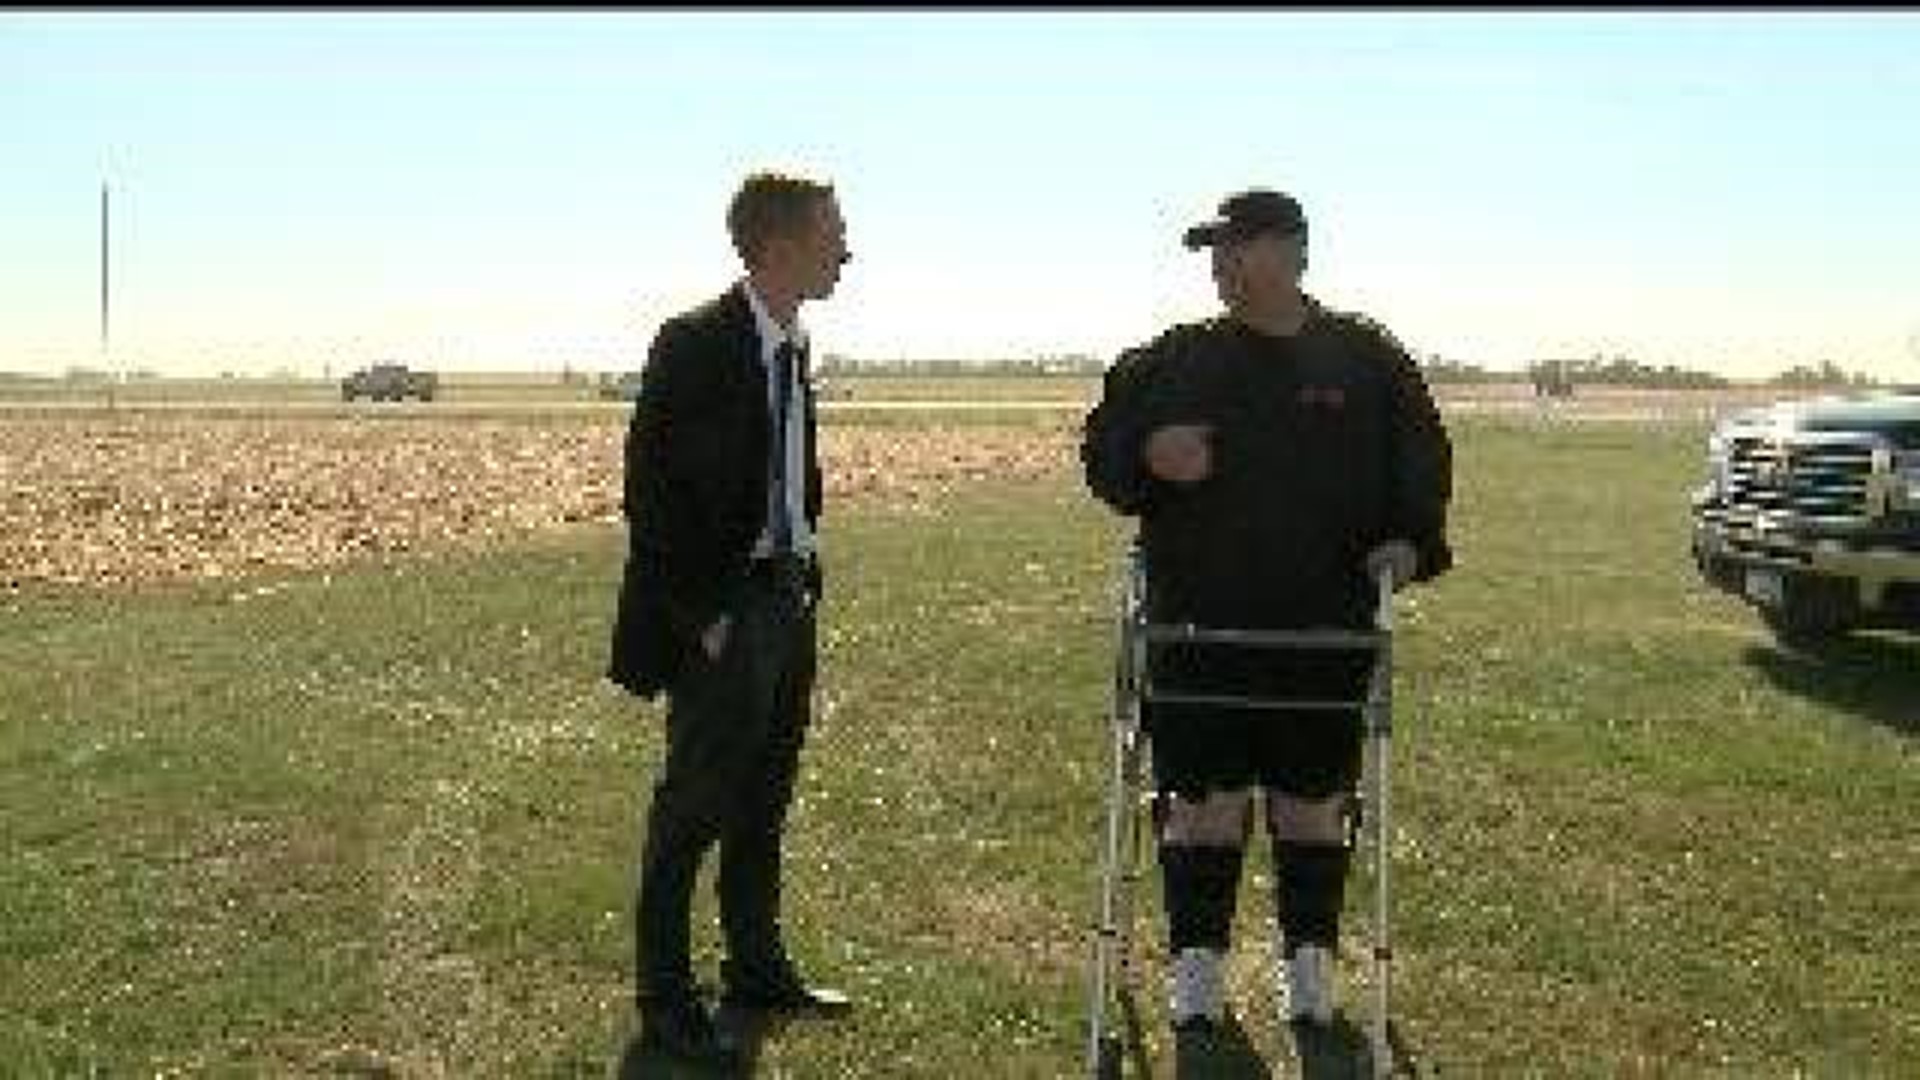 Community Helps Injured Farmer With Harvest